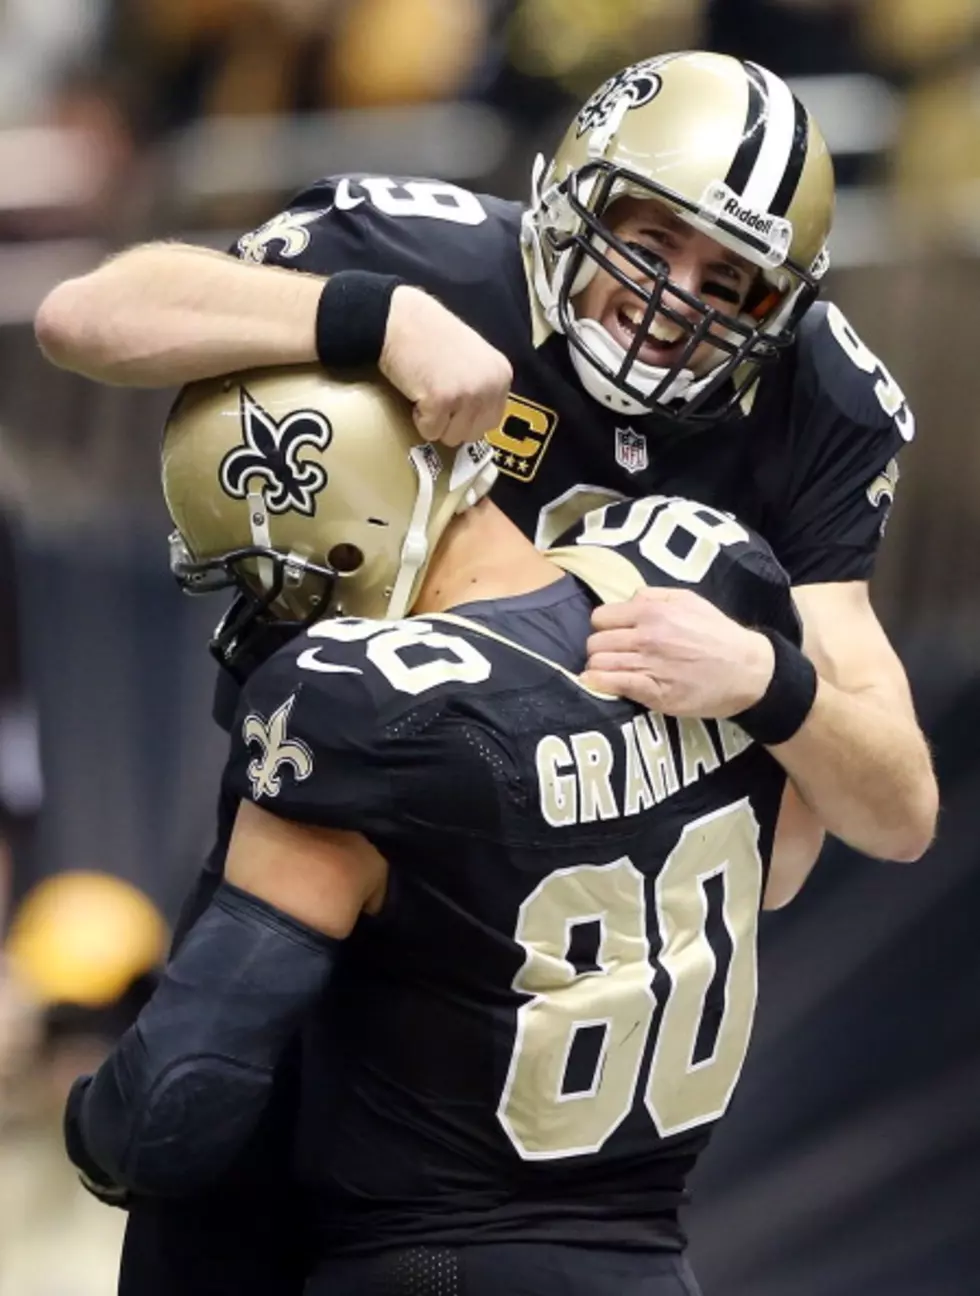 Saints Blowout Buccaneers, Will Play At Eagles In Wild Card Round